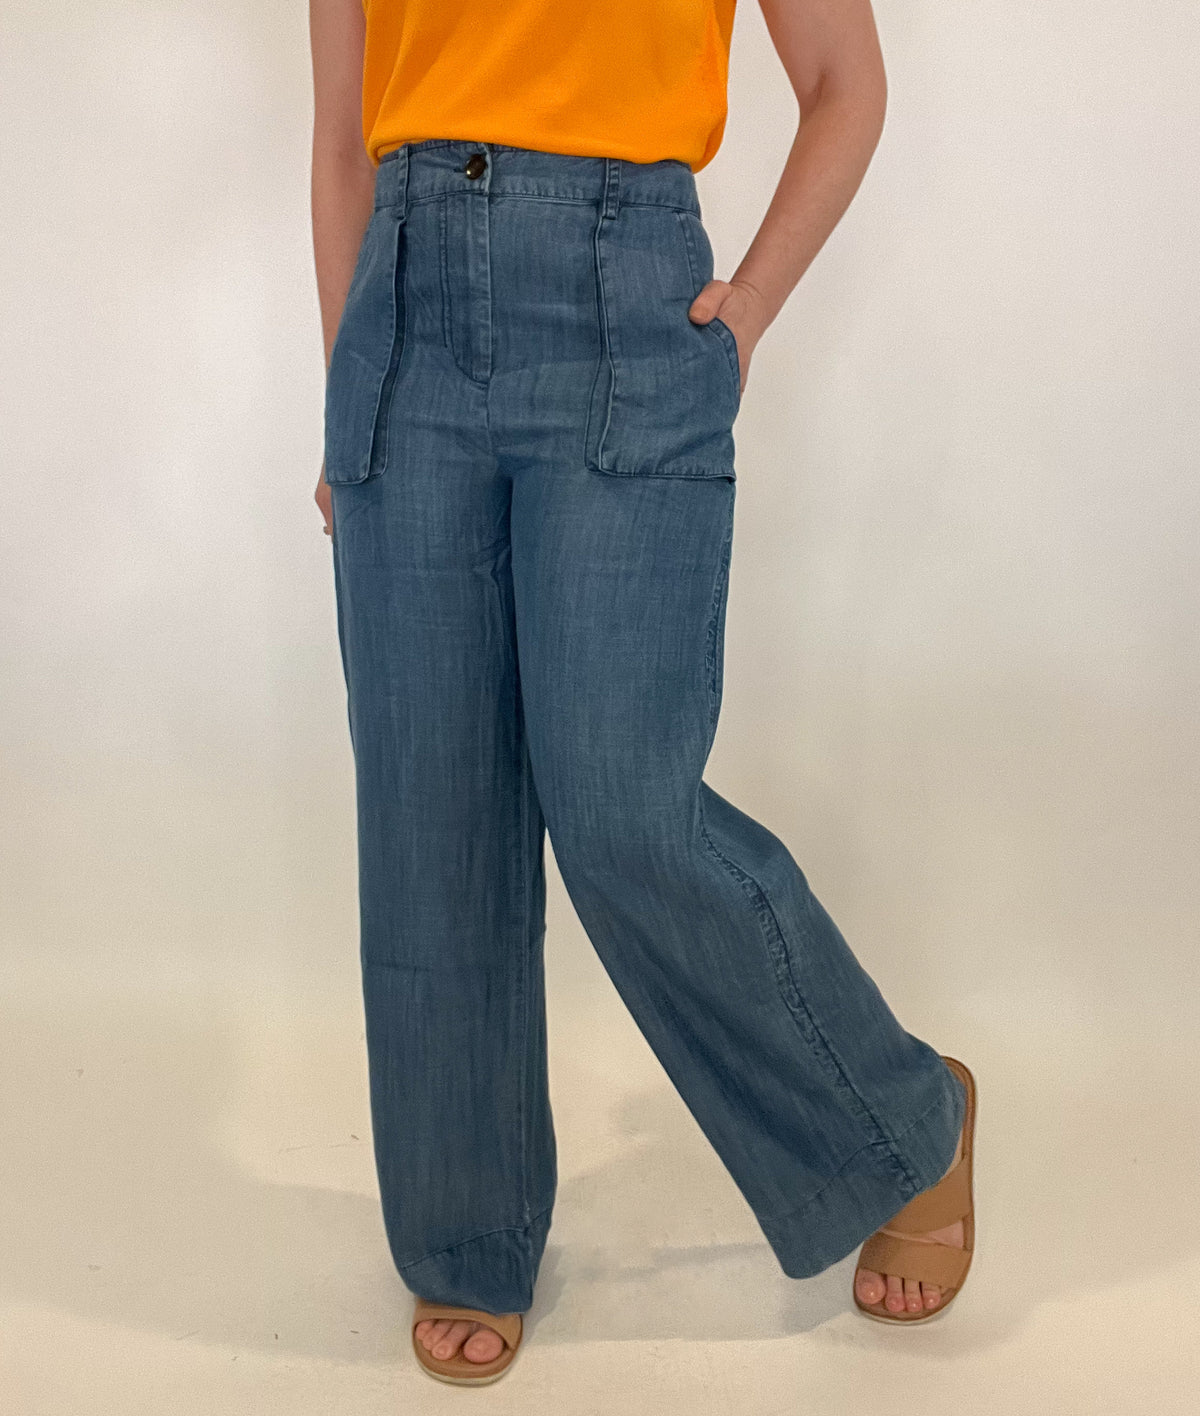 Upgrade your wardrobe with our sophisticated Wide Leg Chambray Pant. Made with luxurious chambray fabric and featuring unique 3d pockets, a button front, and an elastic waist in the back for ultimate comfort. Perfect for spring, these pants offer the look of denim with unmatched comfort. Elevate your style with these pants.